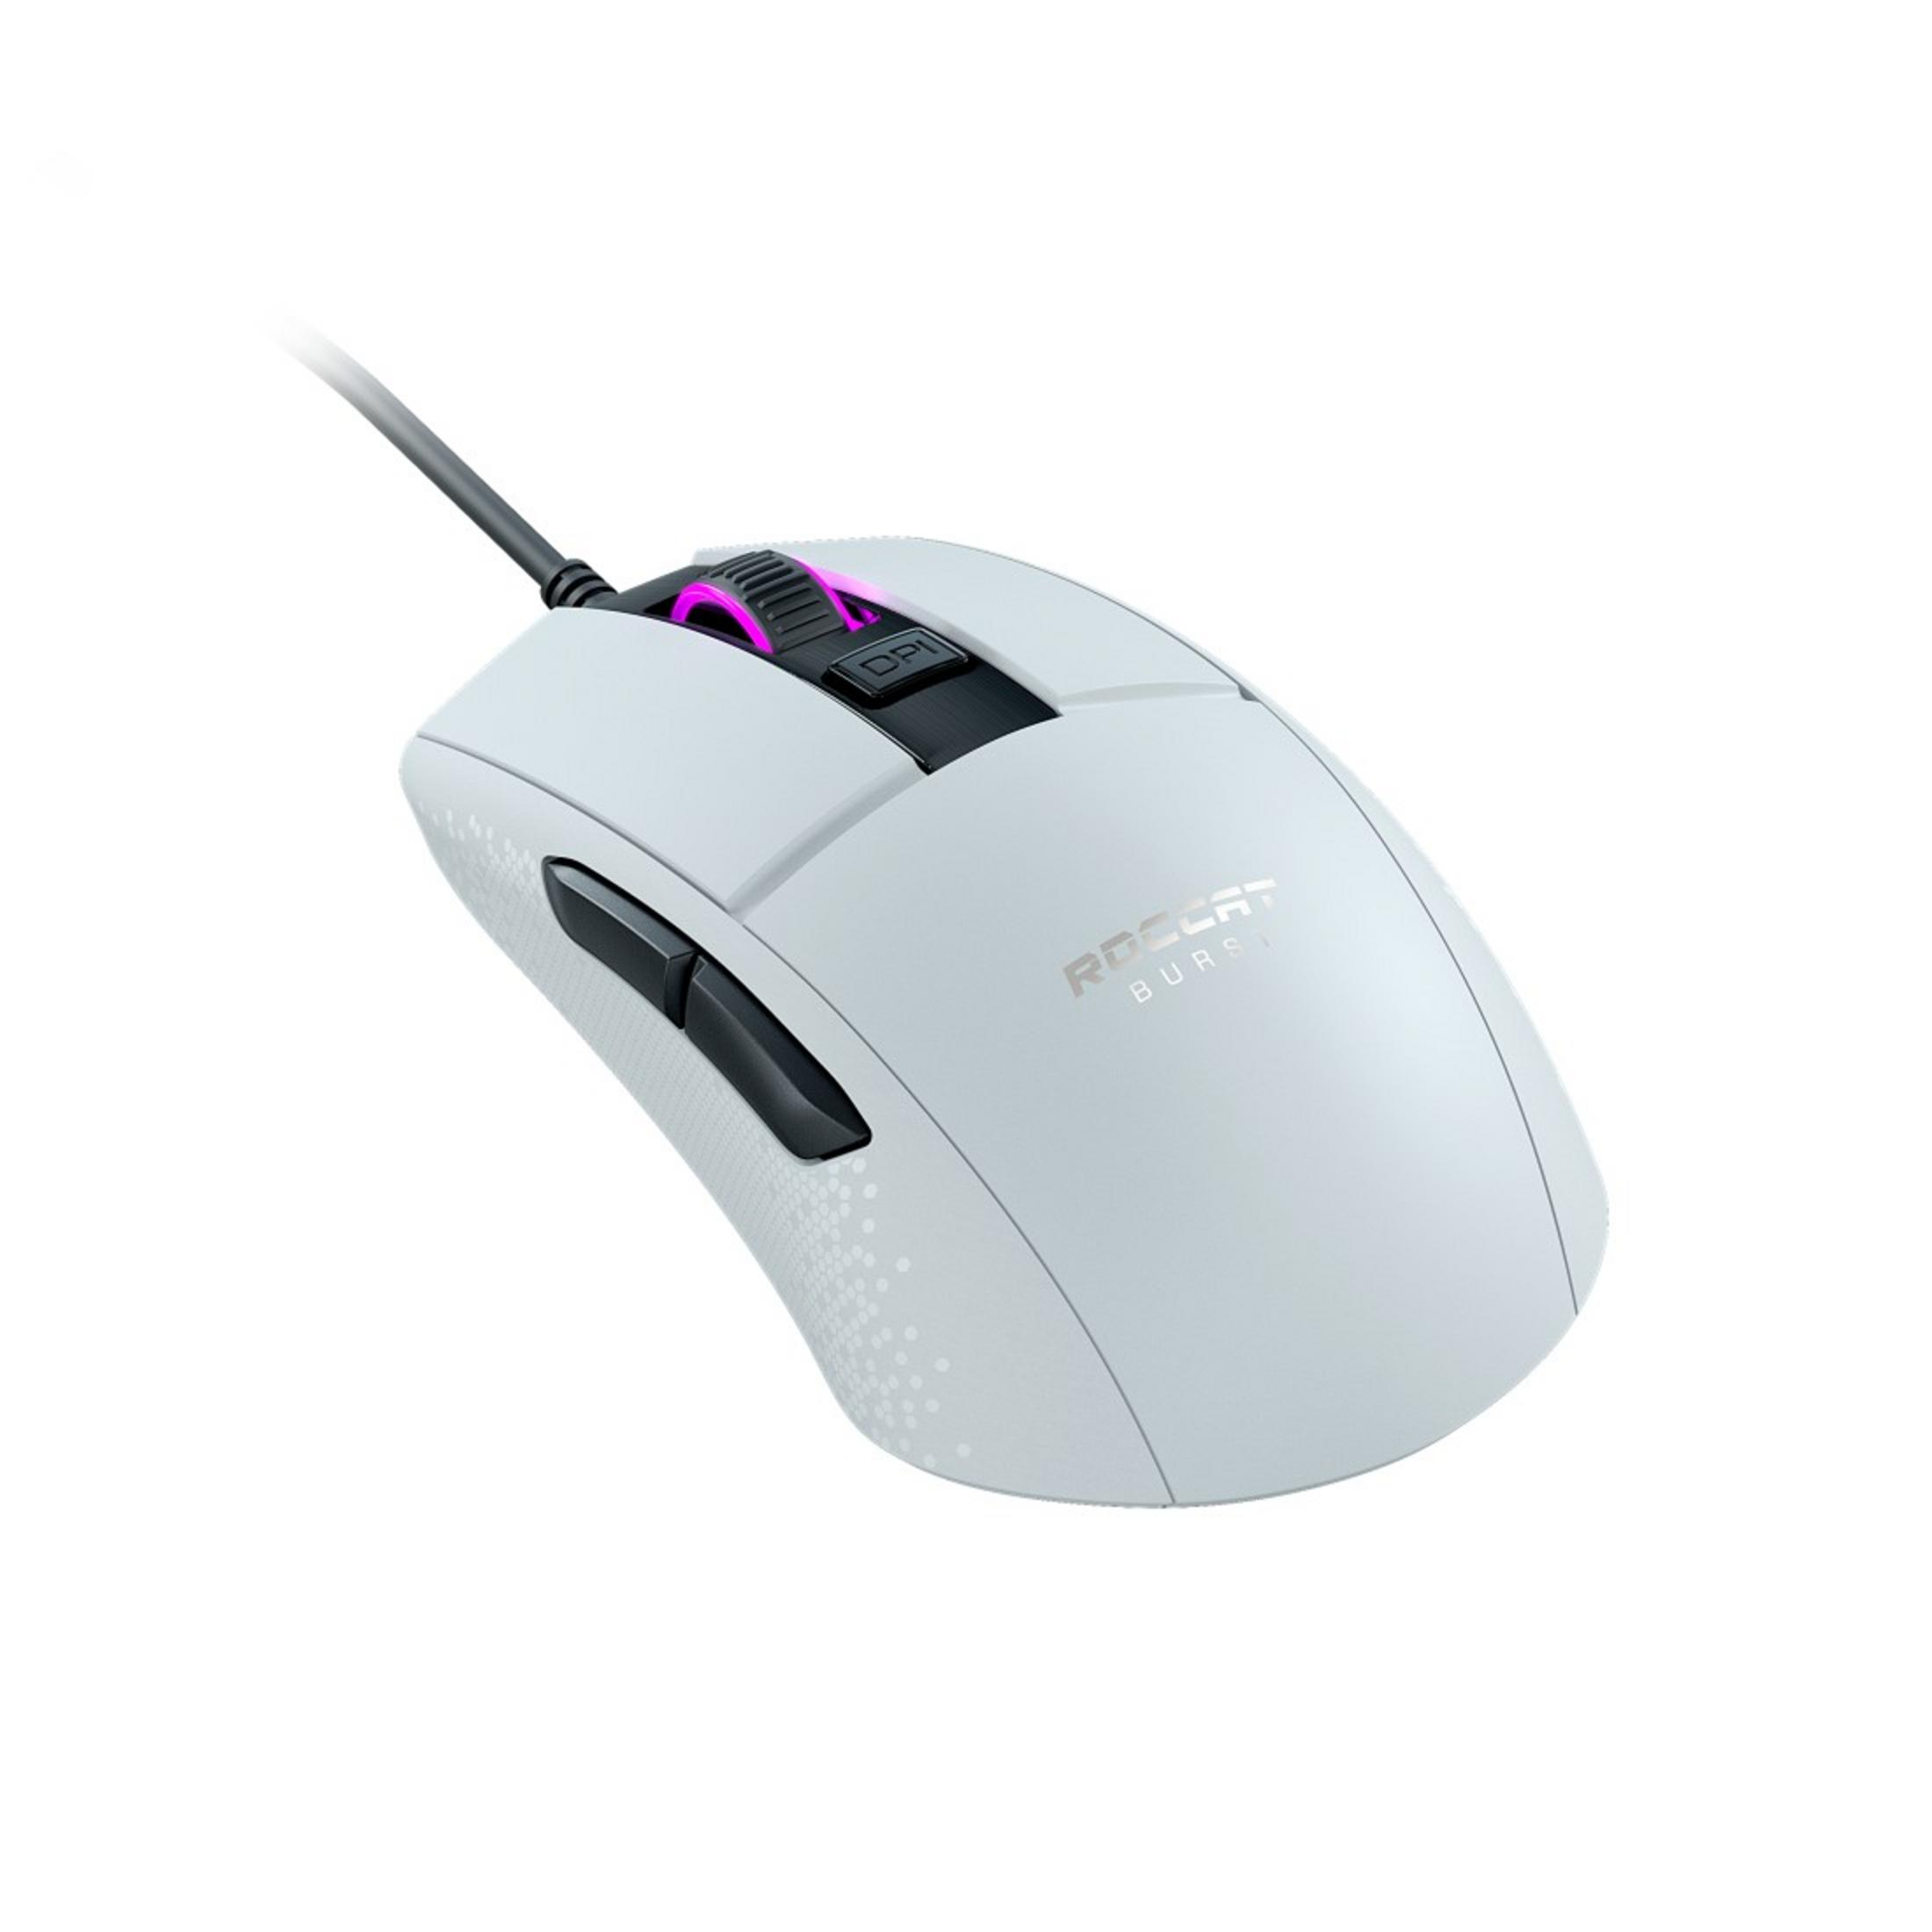 BURST Gaming Weiß CORE ROCCAT Maus, MOUSE ROC-11-751 WI